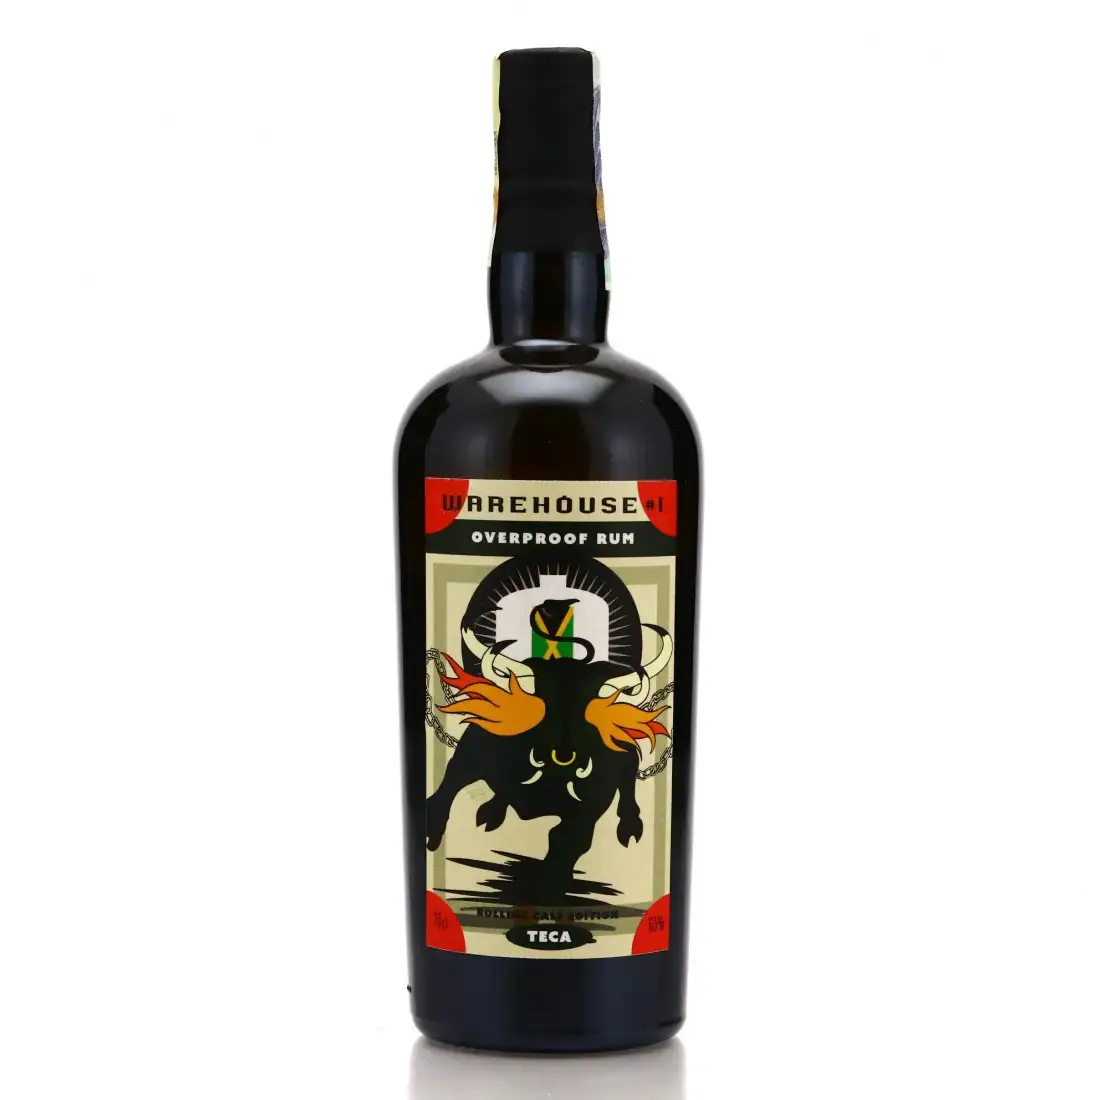 Image of the front of the bottle of the rum Overproof White Rum (Rolling Calf Edition) TECA